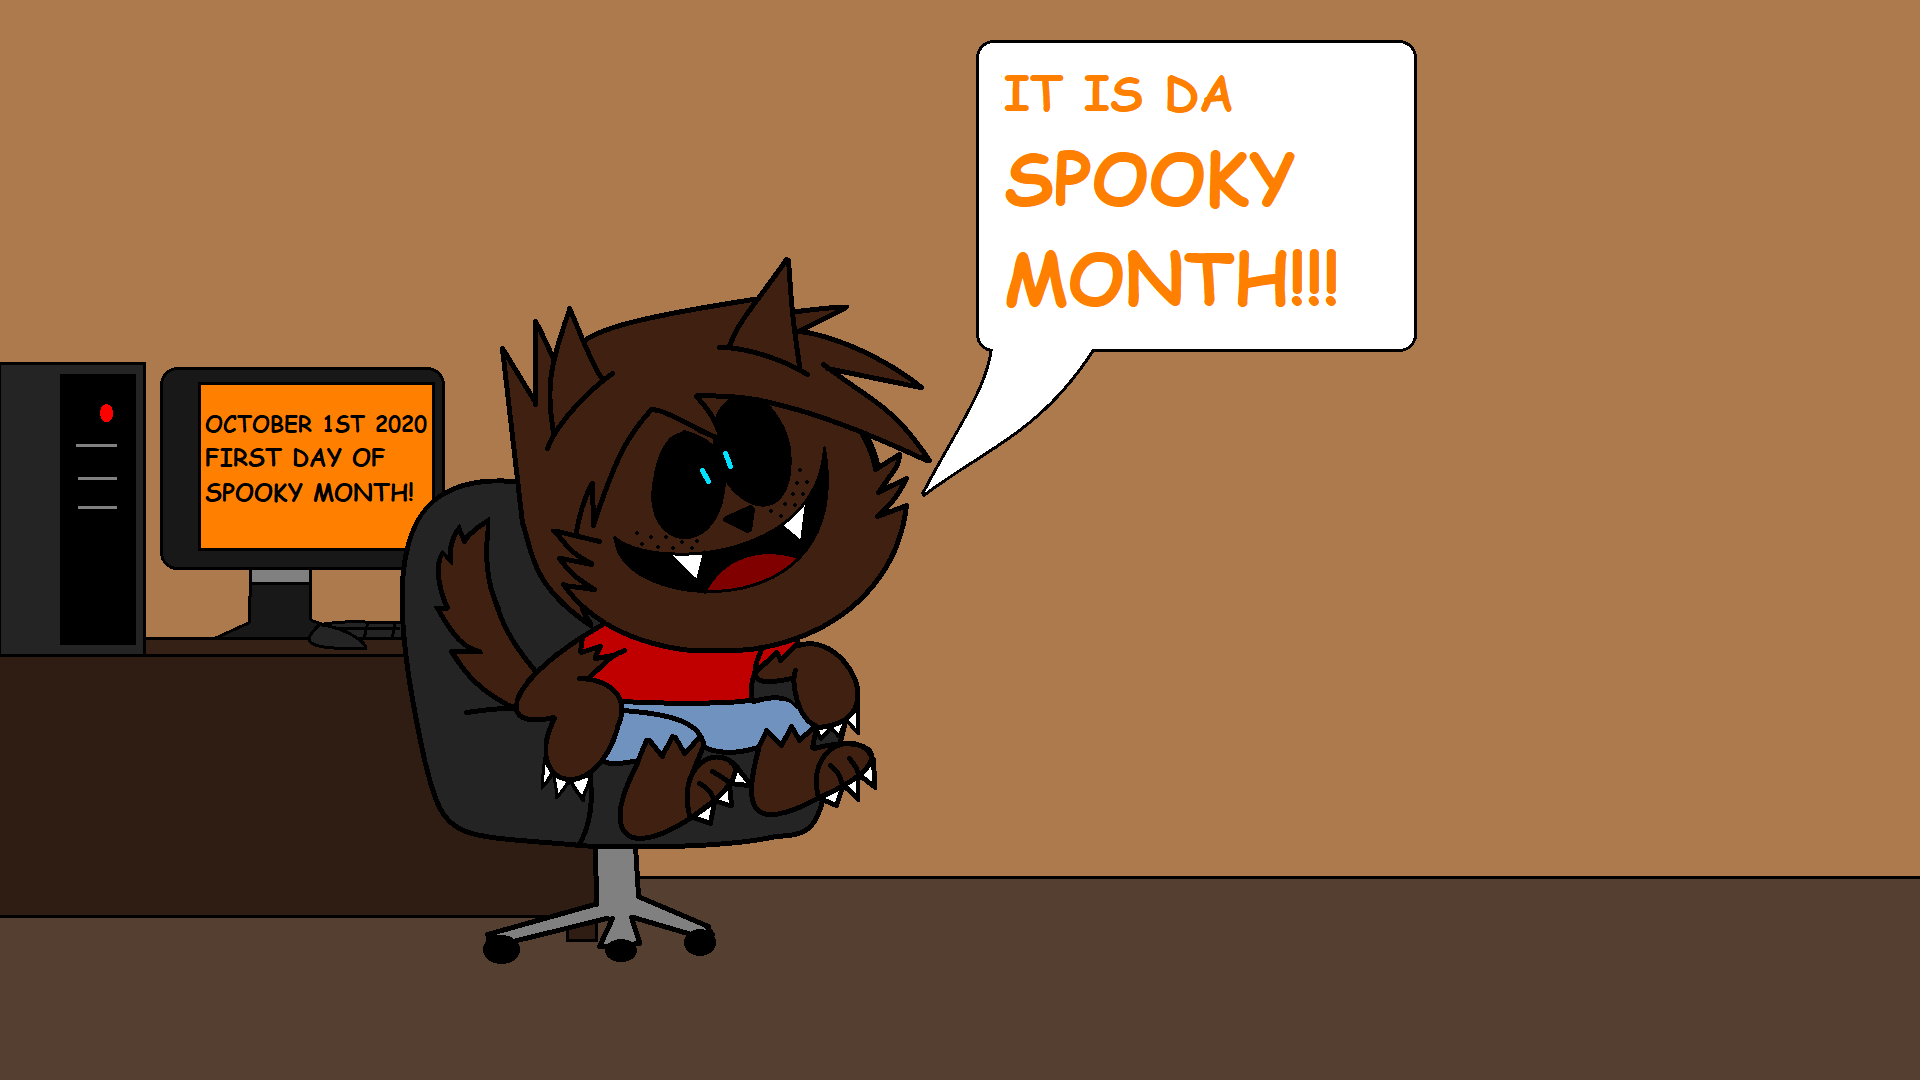 Just made a stupit spooky month GIF by whiteplumage233 on DeviantArt